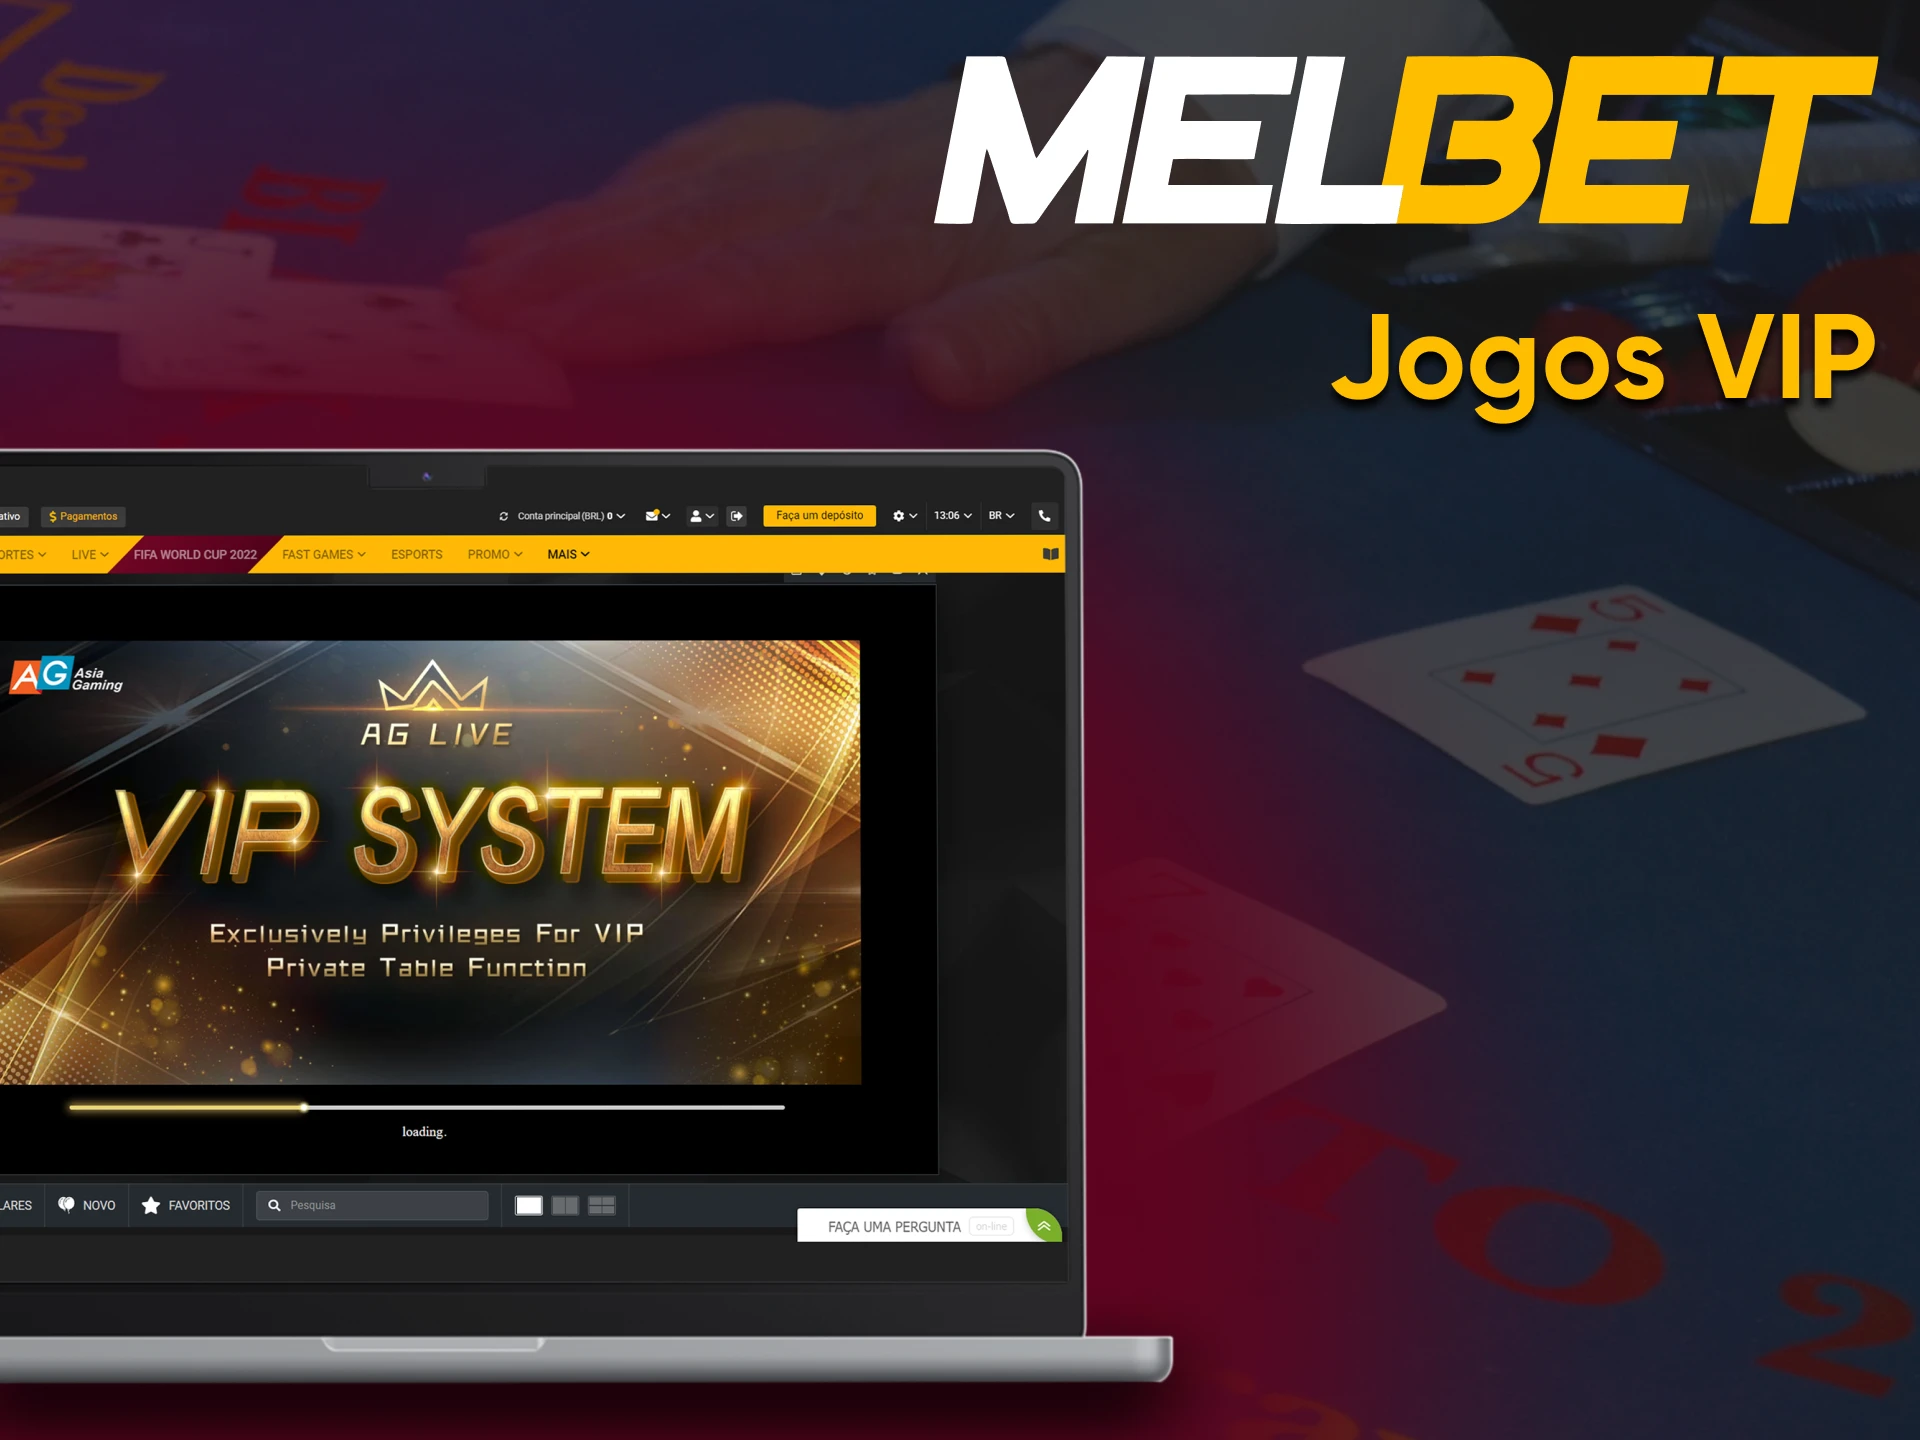 To play Melbet VIP Games, go to the desired section.